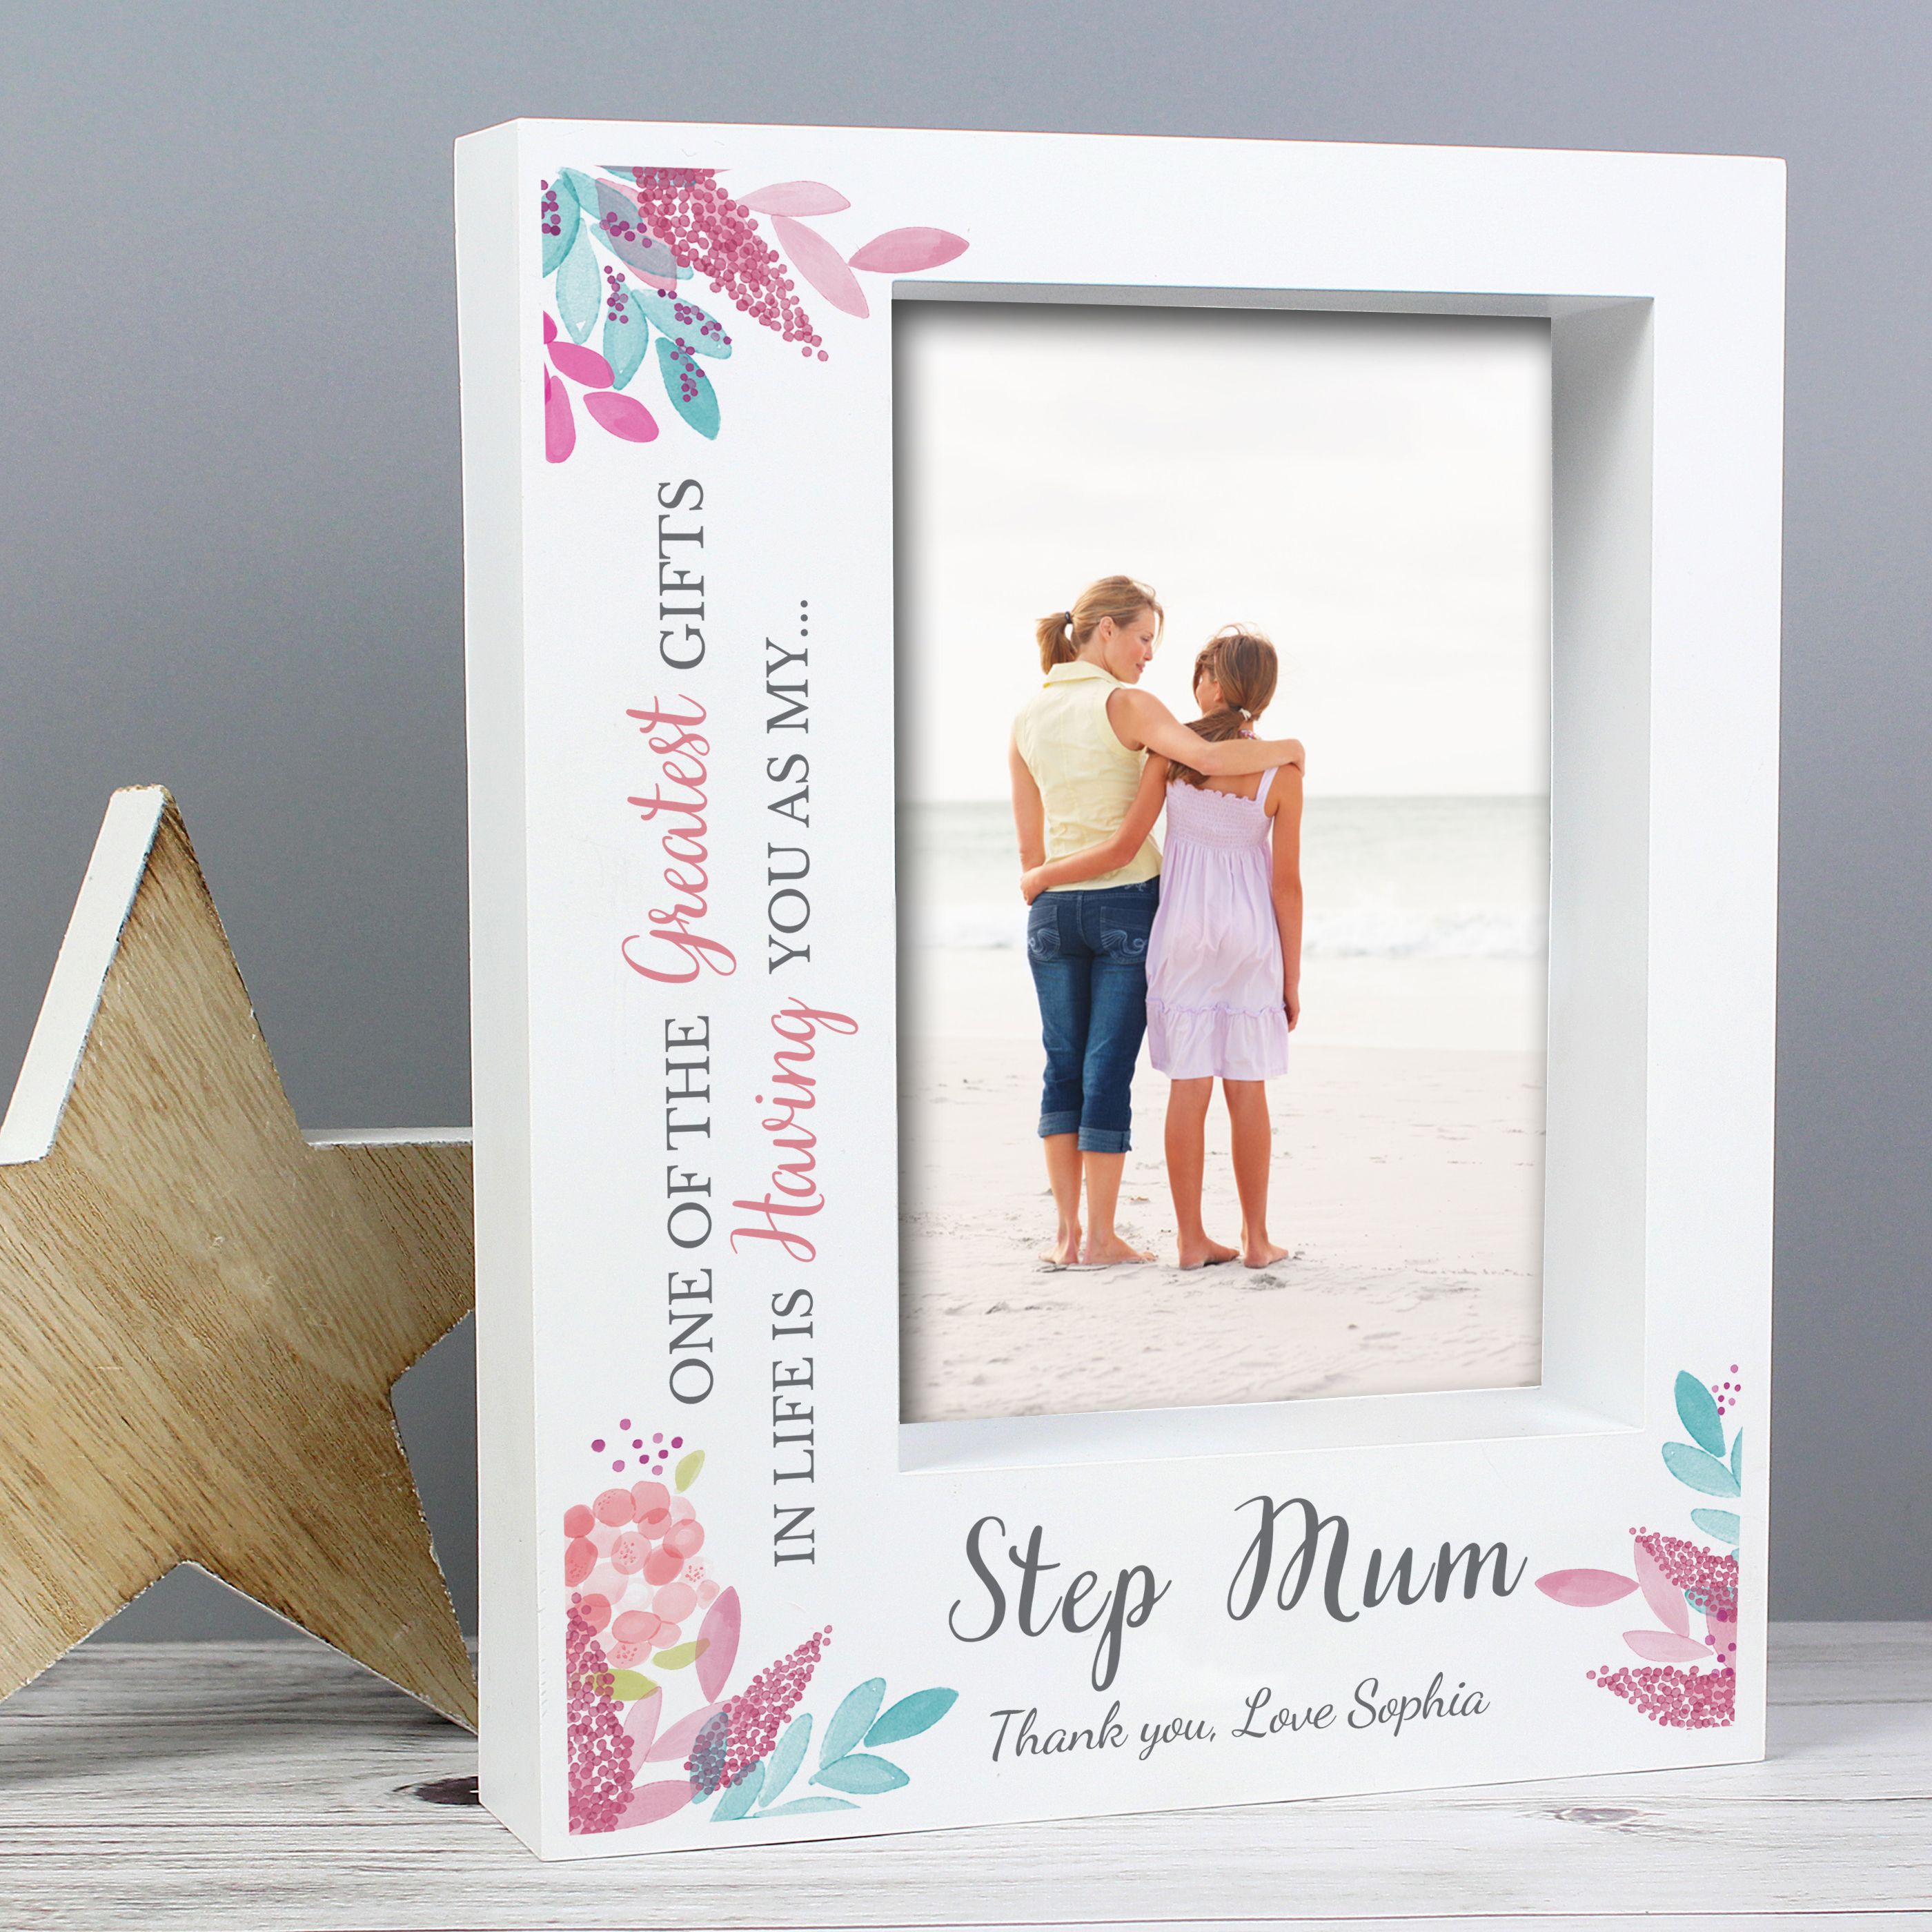 Personalised Box Photo Frame - One Of The Greatest Gifts In Life...